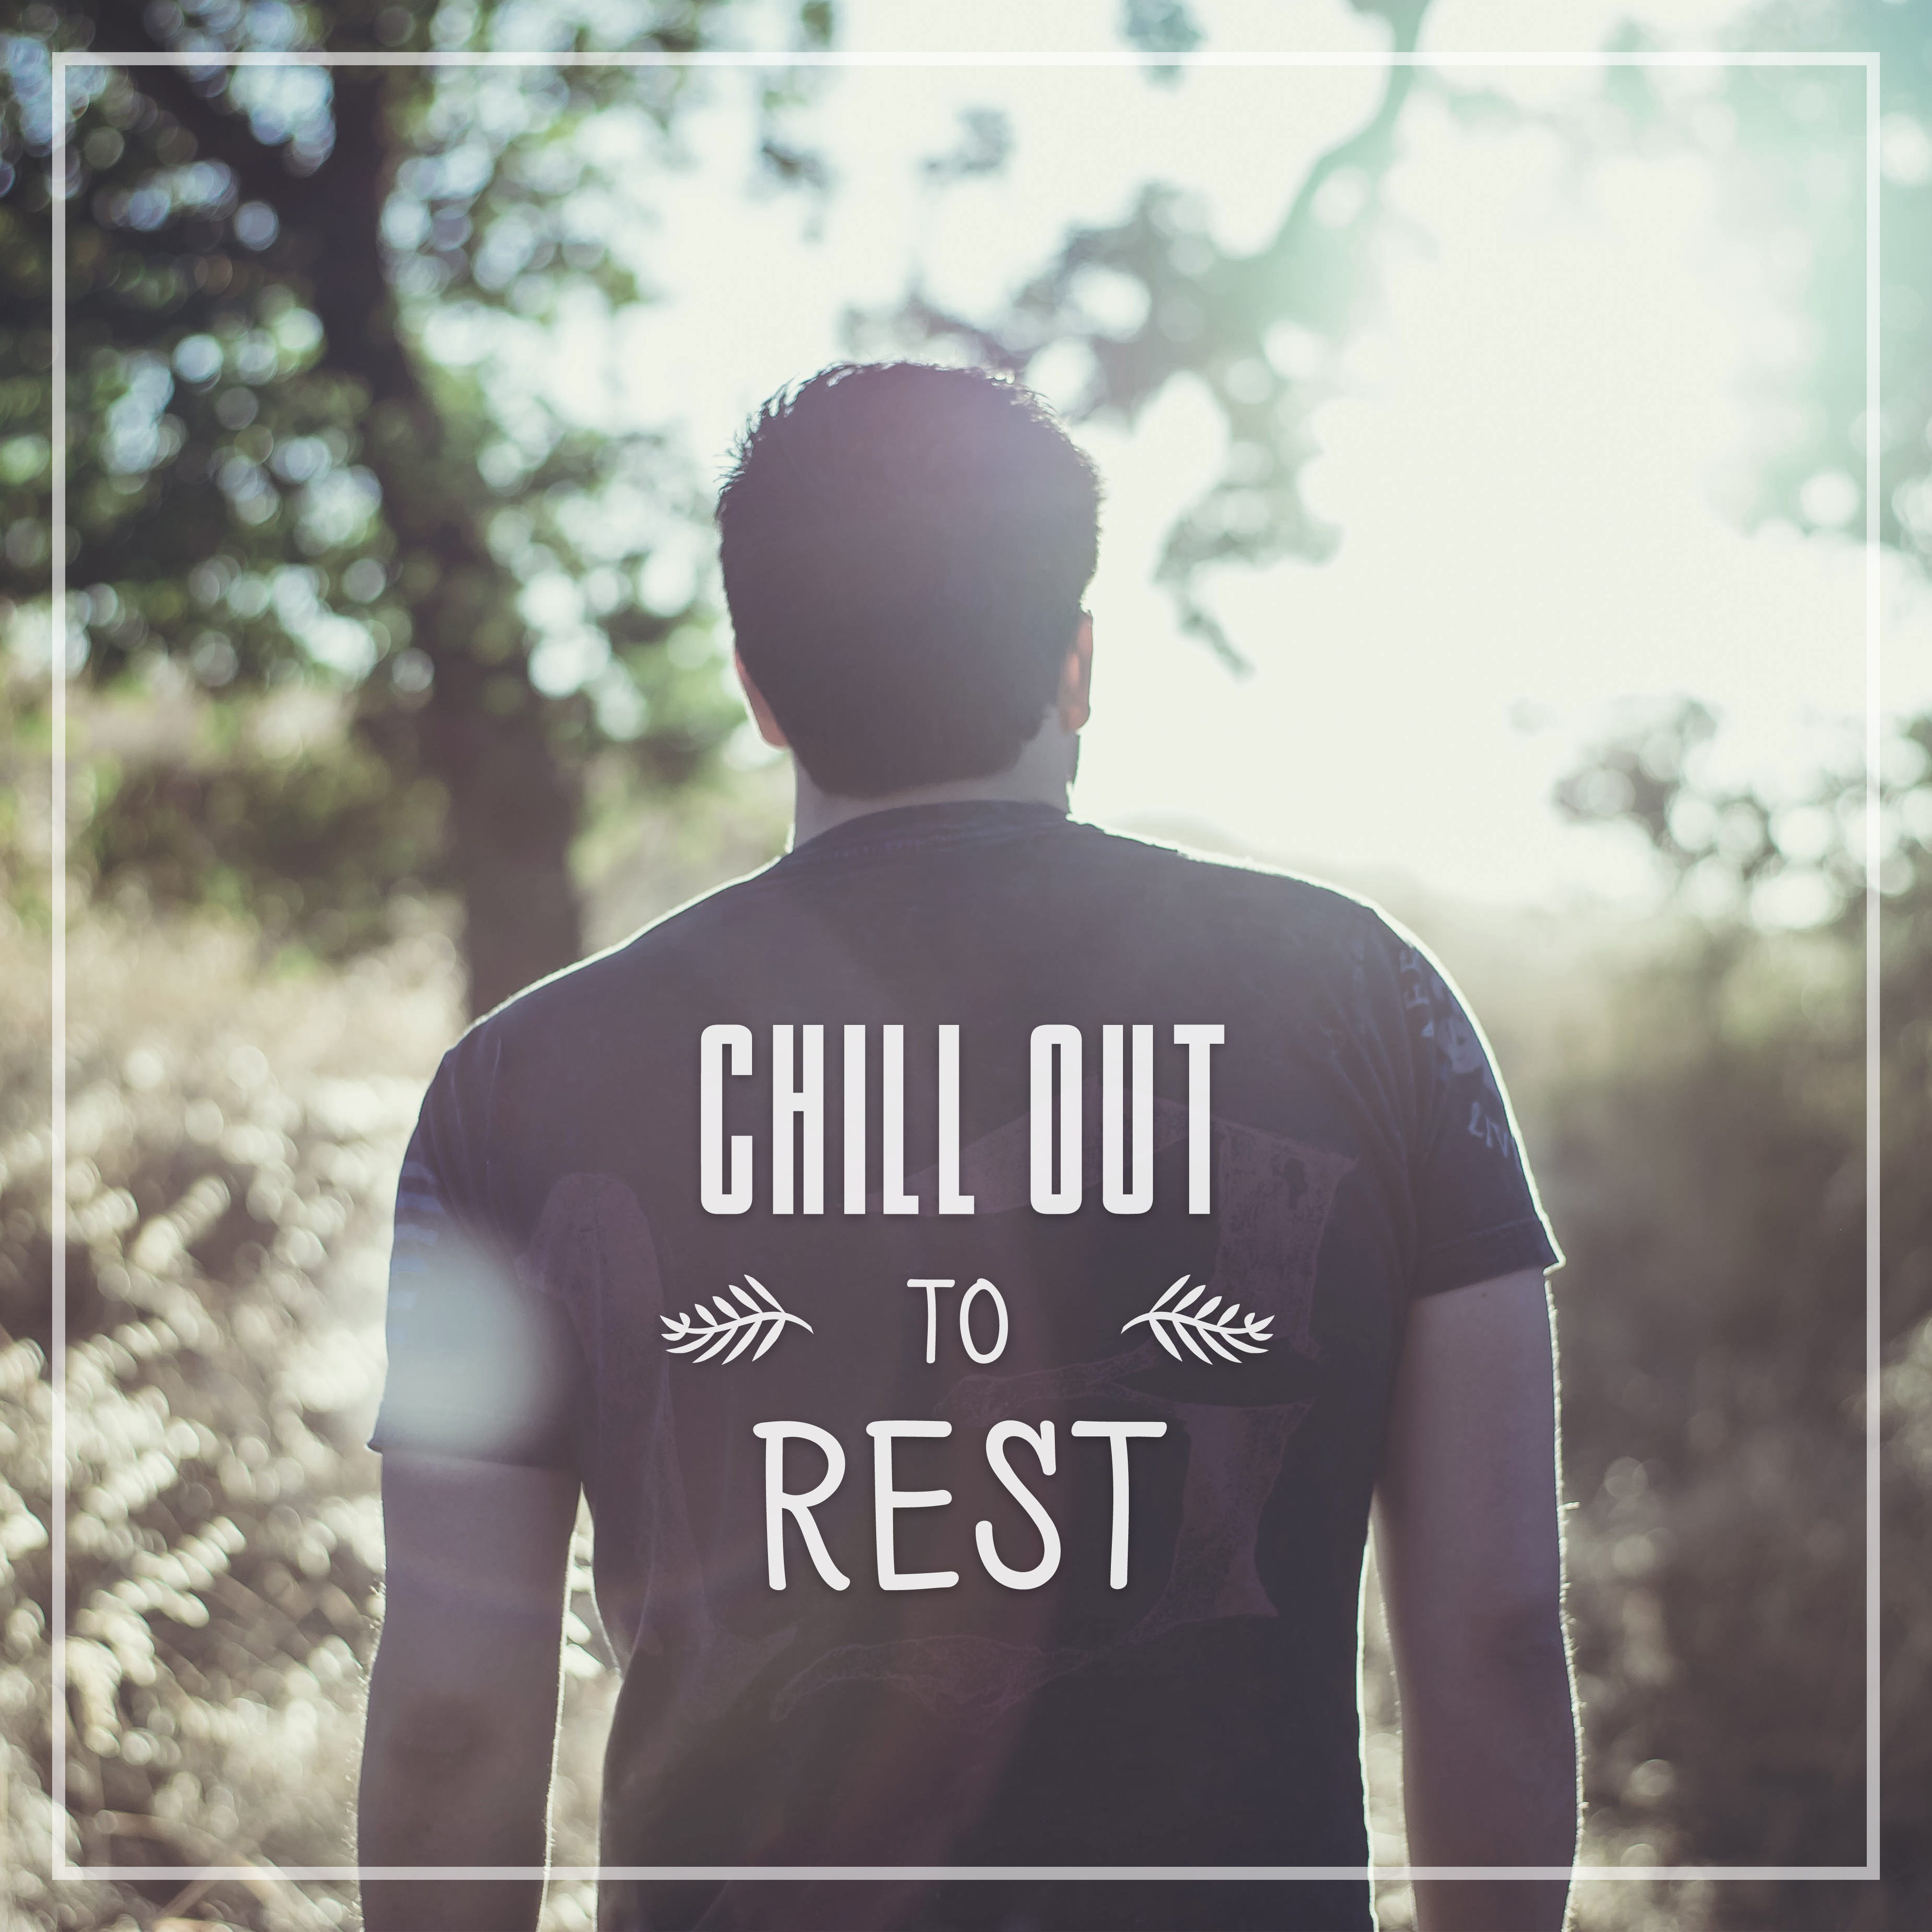 Chill Out to Rest – Summer Vibes, Relaxing Chill, Peaceful Music, Easy Listening, Ibiza Beach